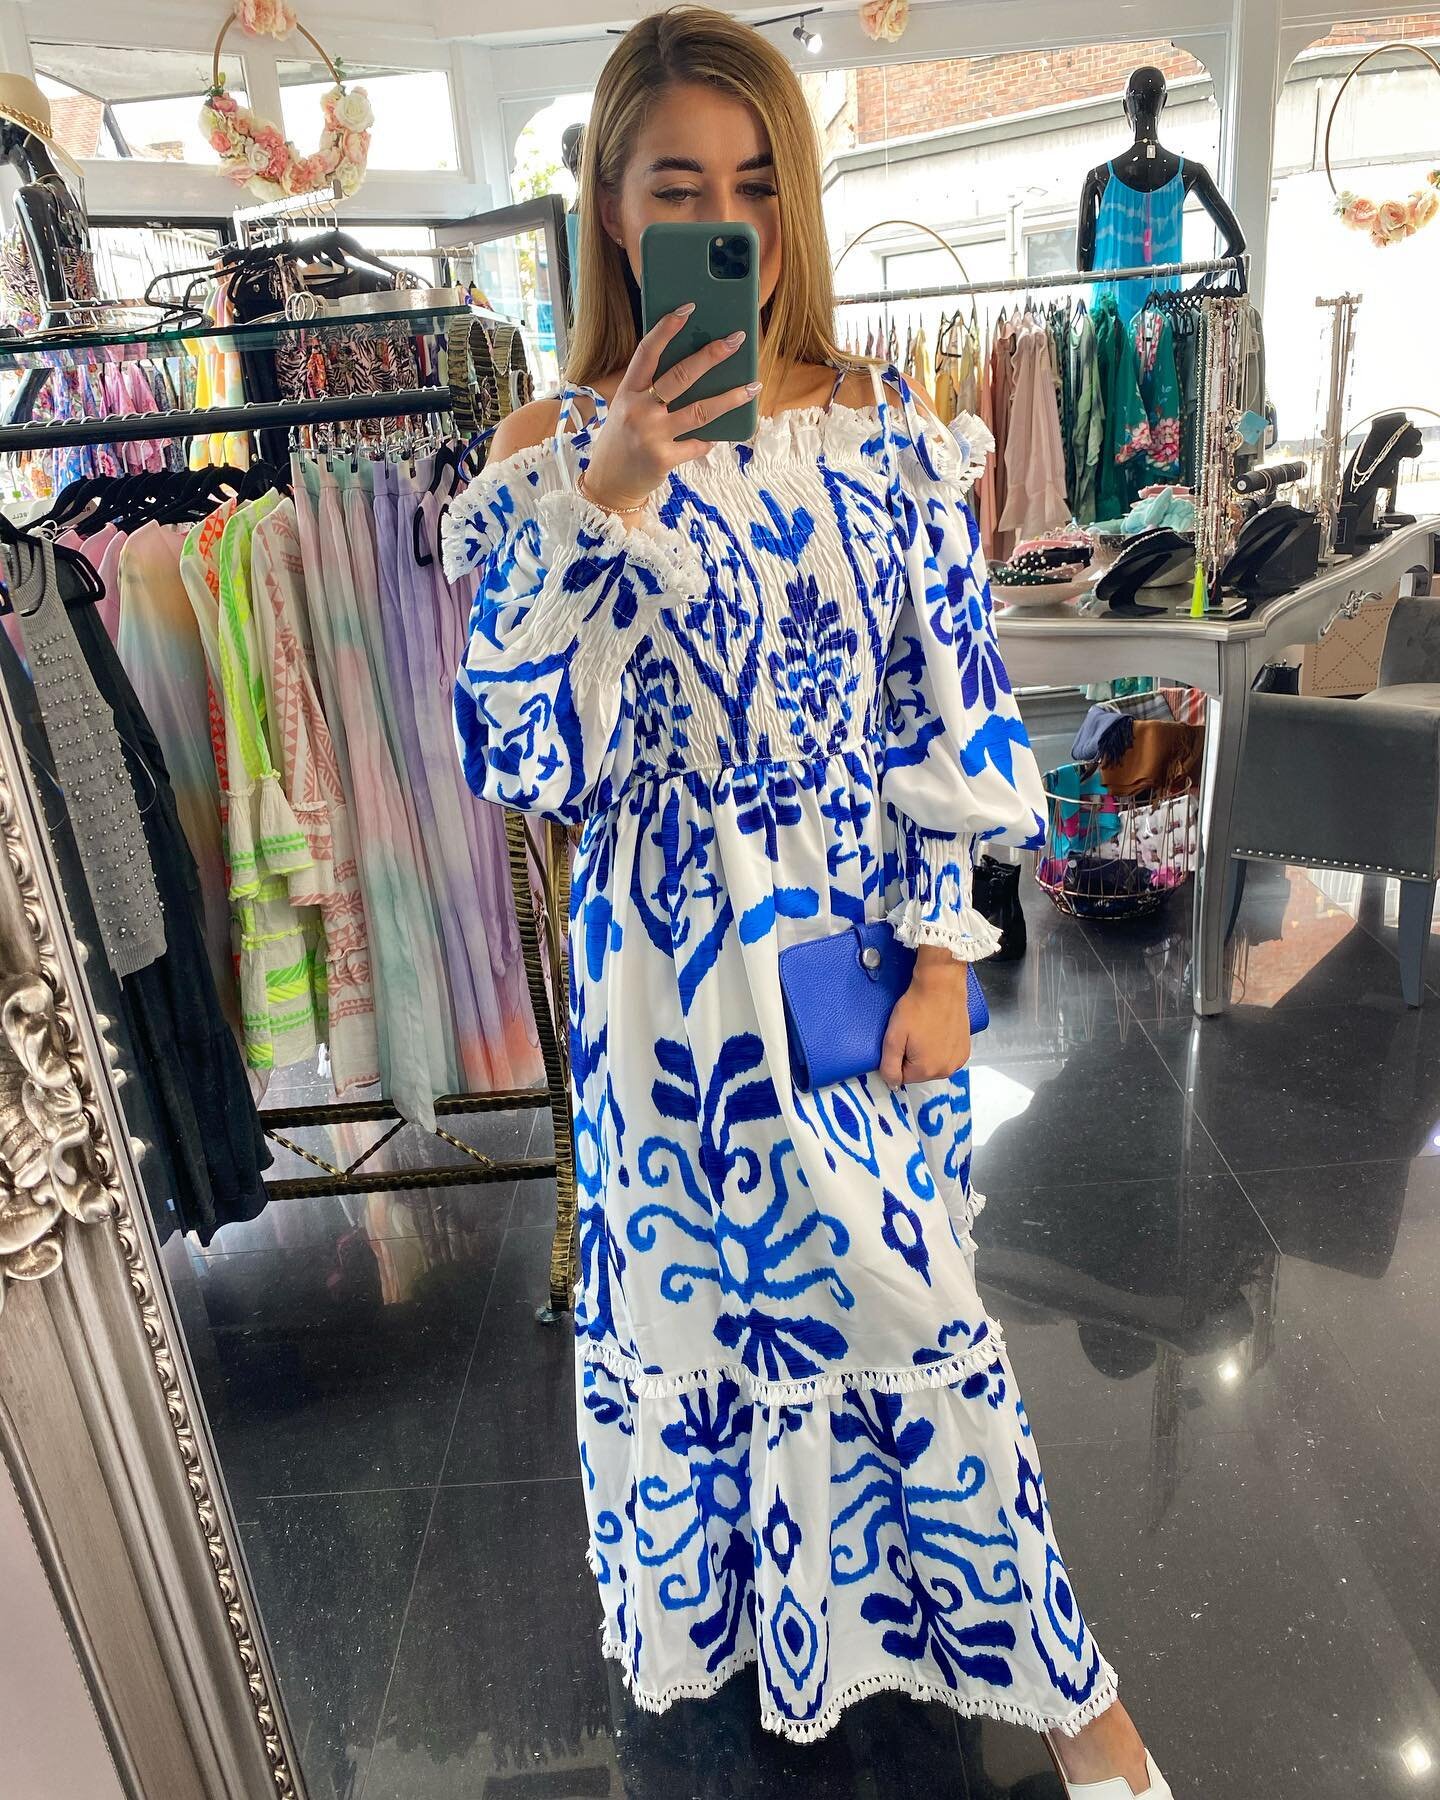 We are getting such Santorini vibes with our newest maxi dress 💙 This is selling super fast so be quick! Sizes small, medium and large.

Shop in store or online at www.blushboutiques.co.uk 💙
.
.
.
#maxidress #santorini #bucks #boutique #boutiquesho